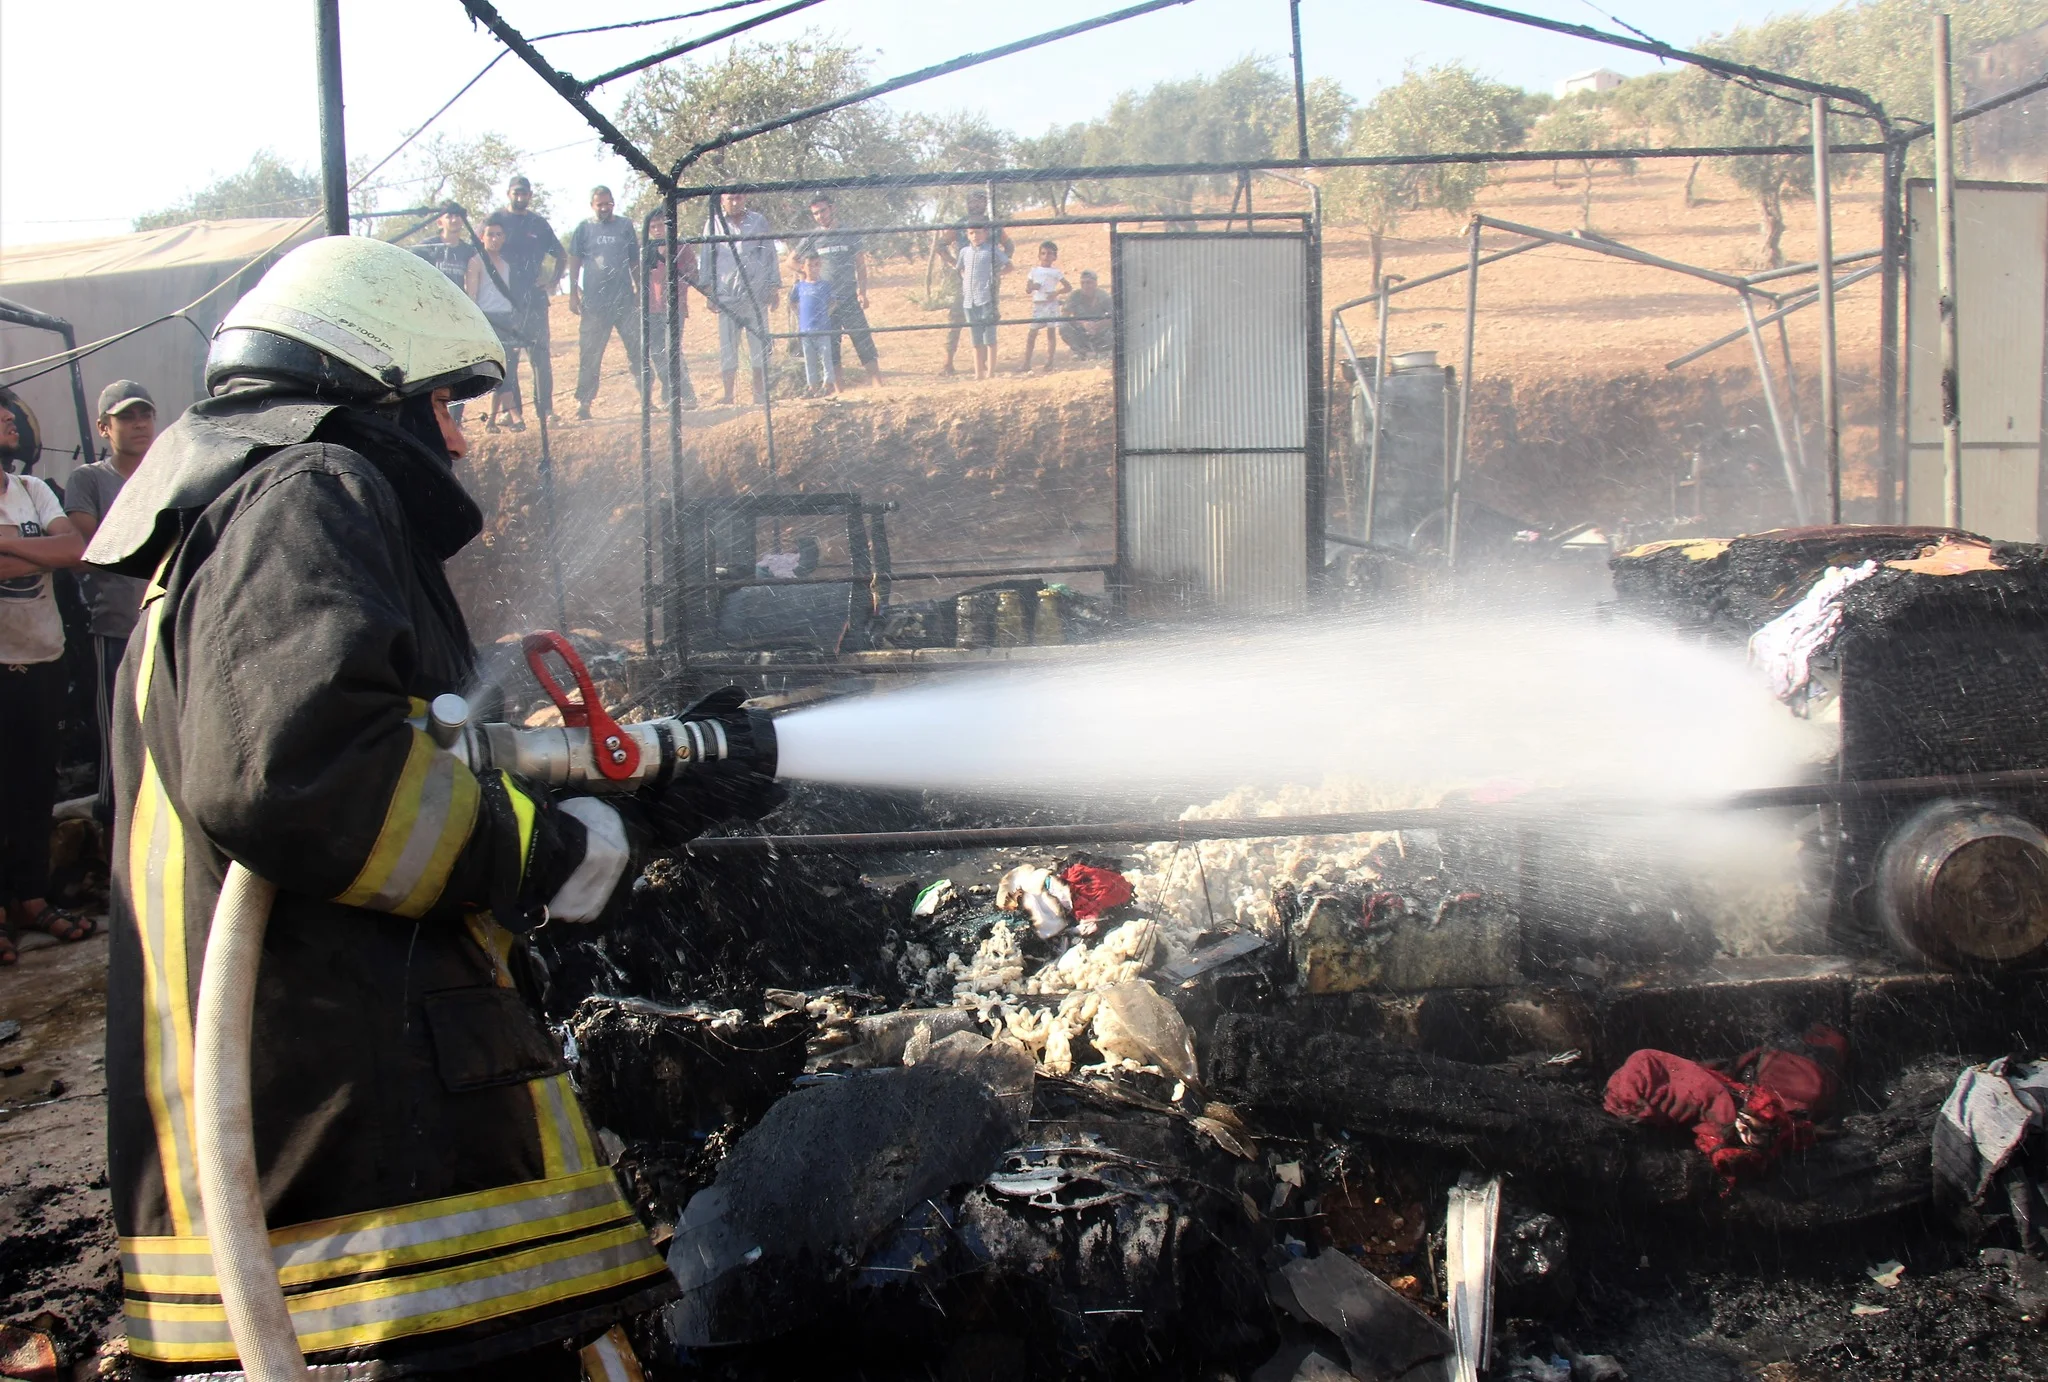 A fire broke out at an IDPs Camp in northern Idlib governorate on September 3